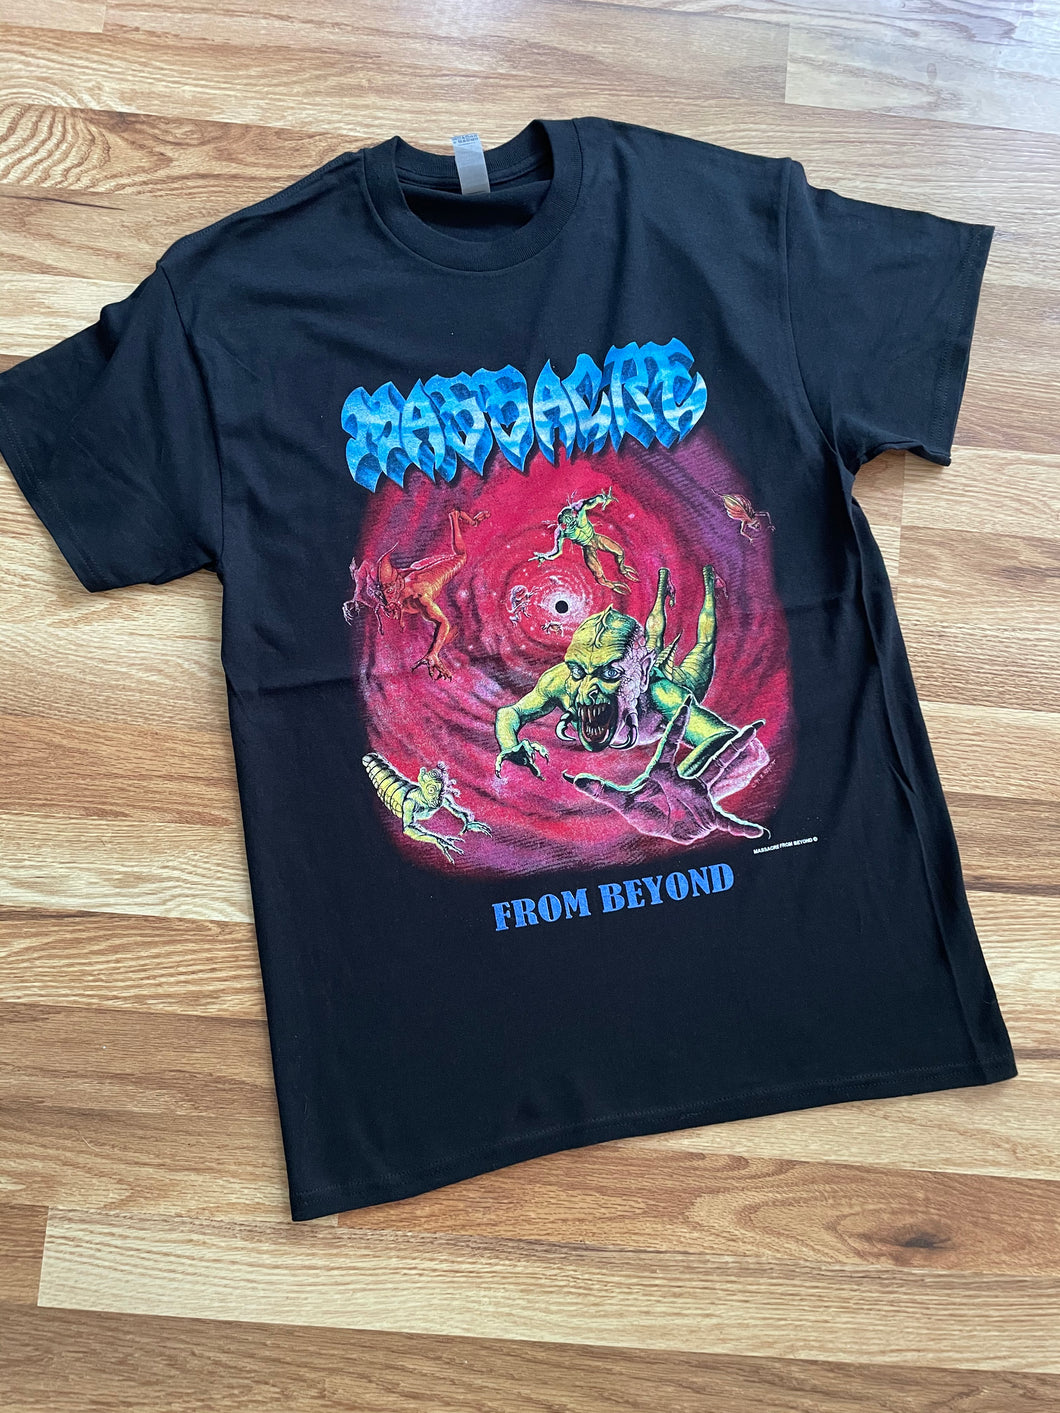 Massacre - From Beyond Imported Shirt